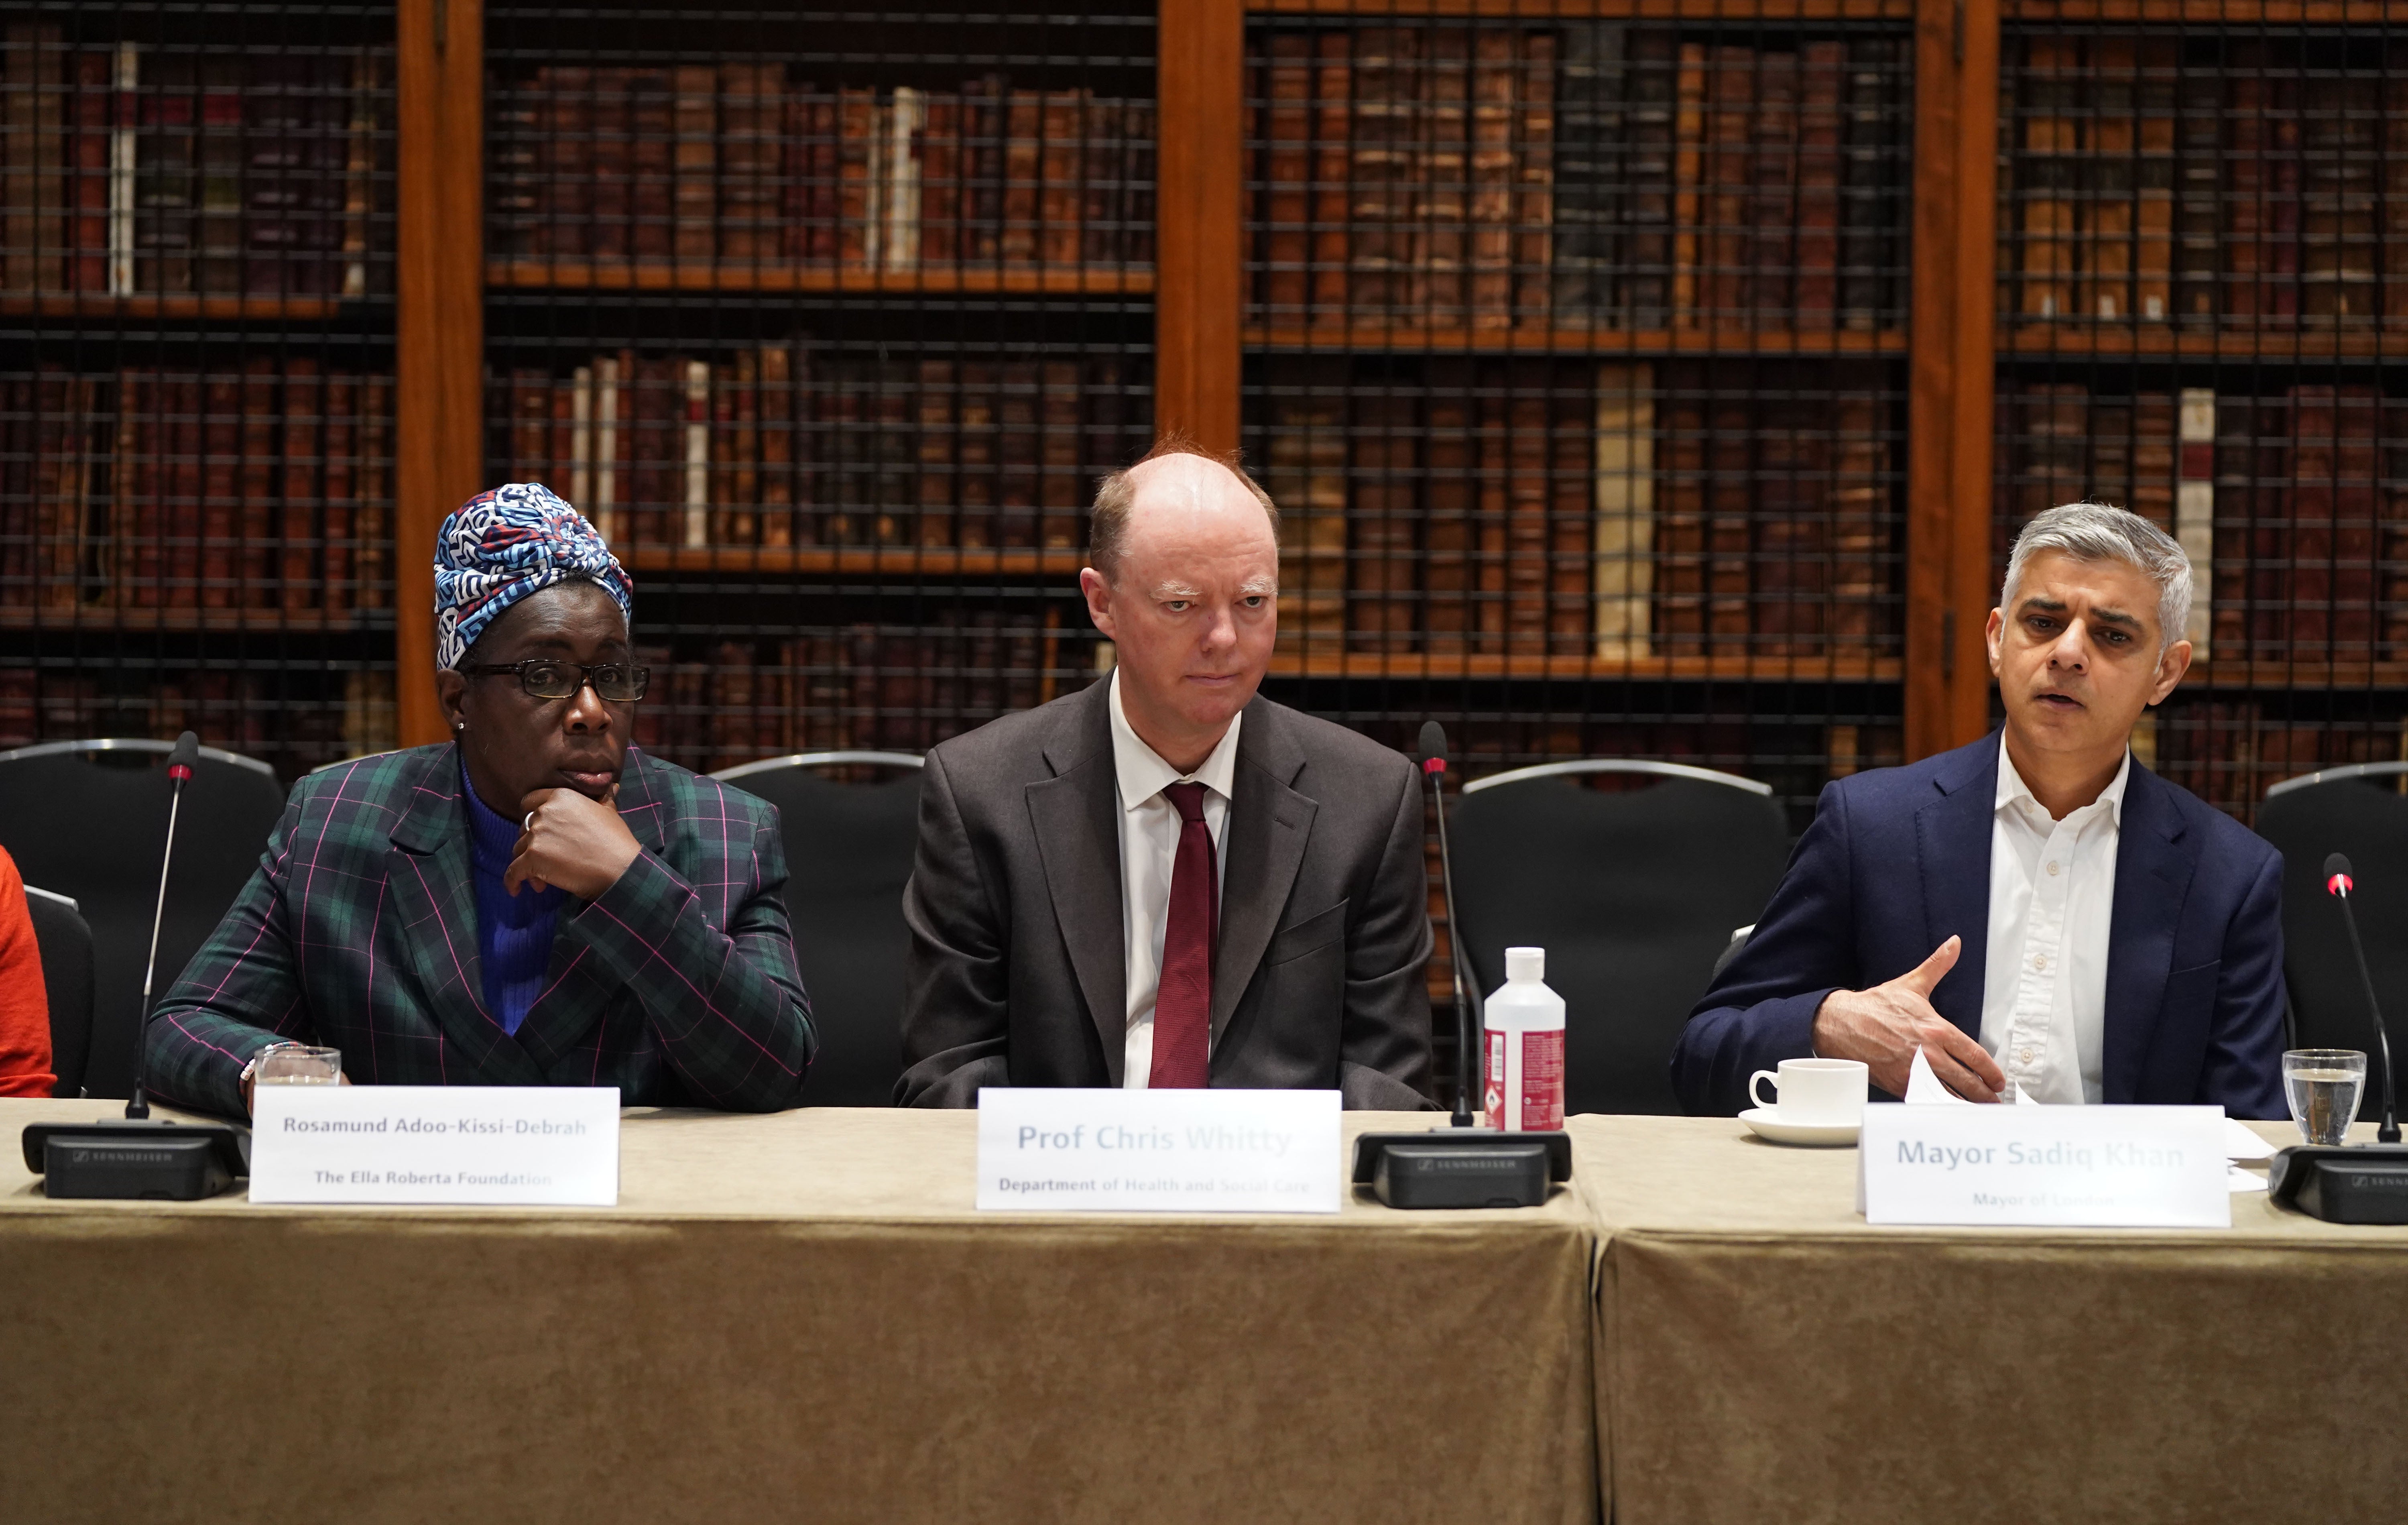 Ms Adoo-Kissi-Debrah, left to right, Sir Chris and Mr Khan spoke at the summit (Stefan Rousseau/PA)